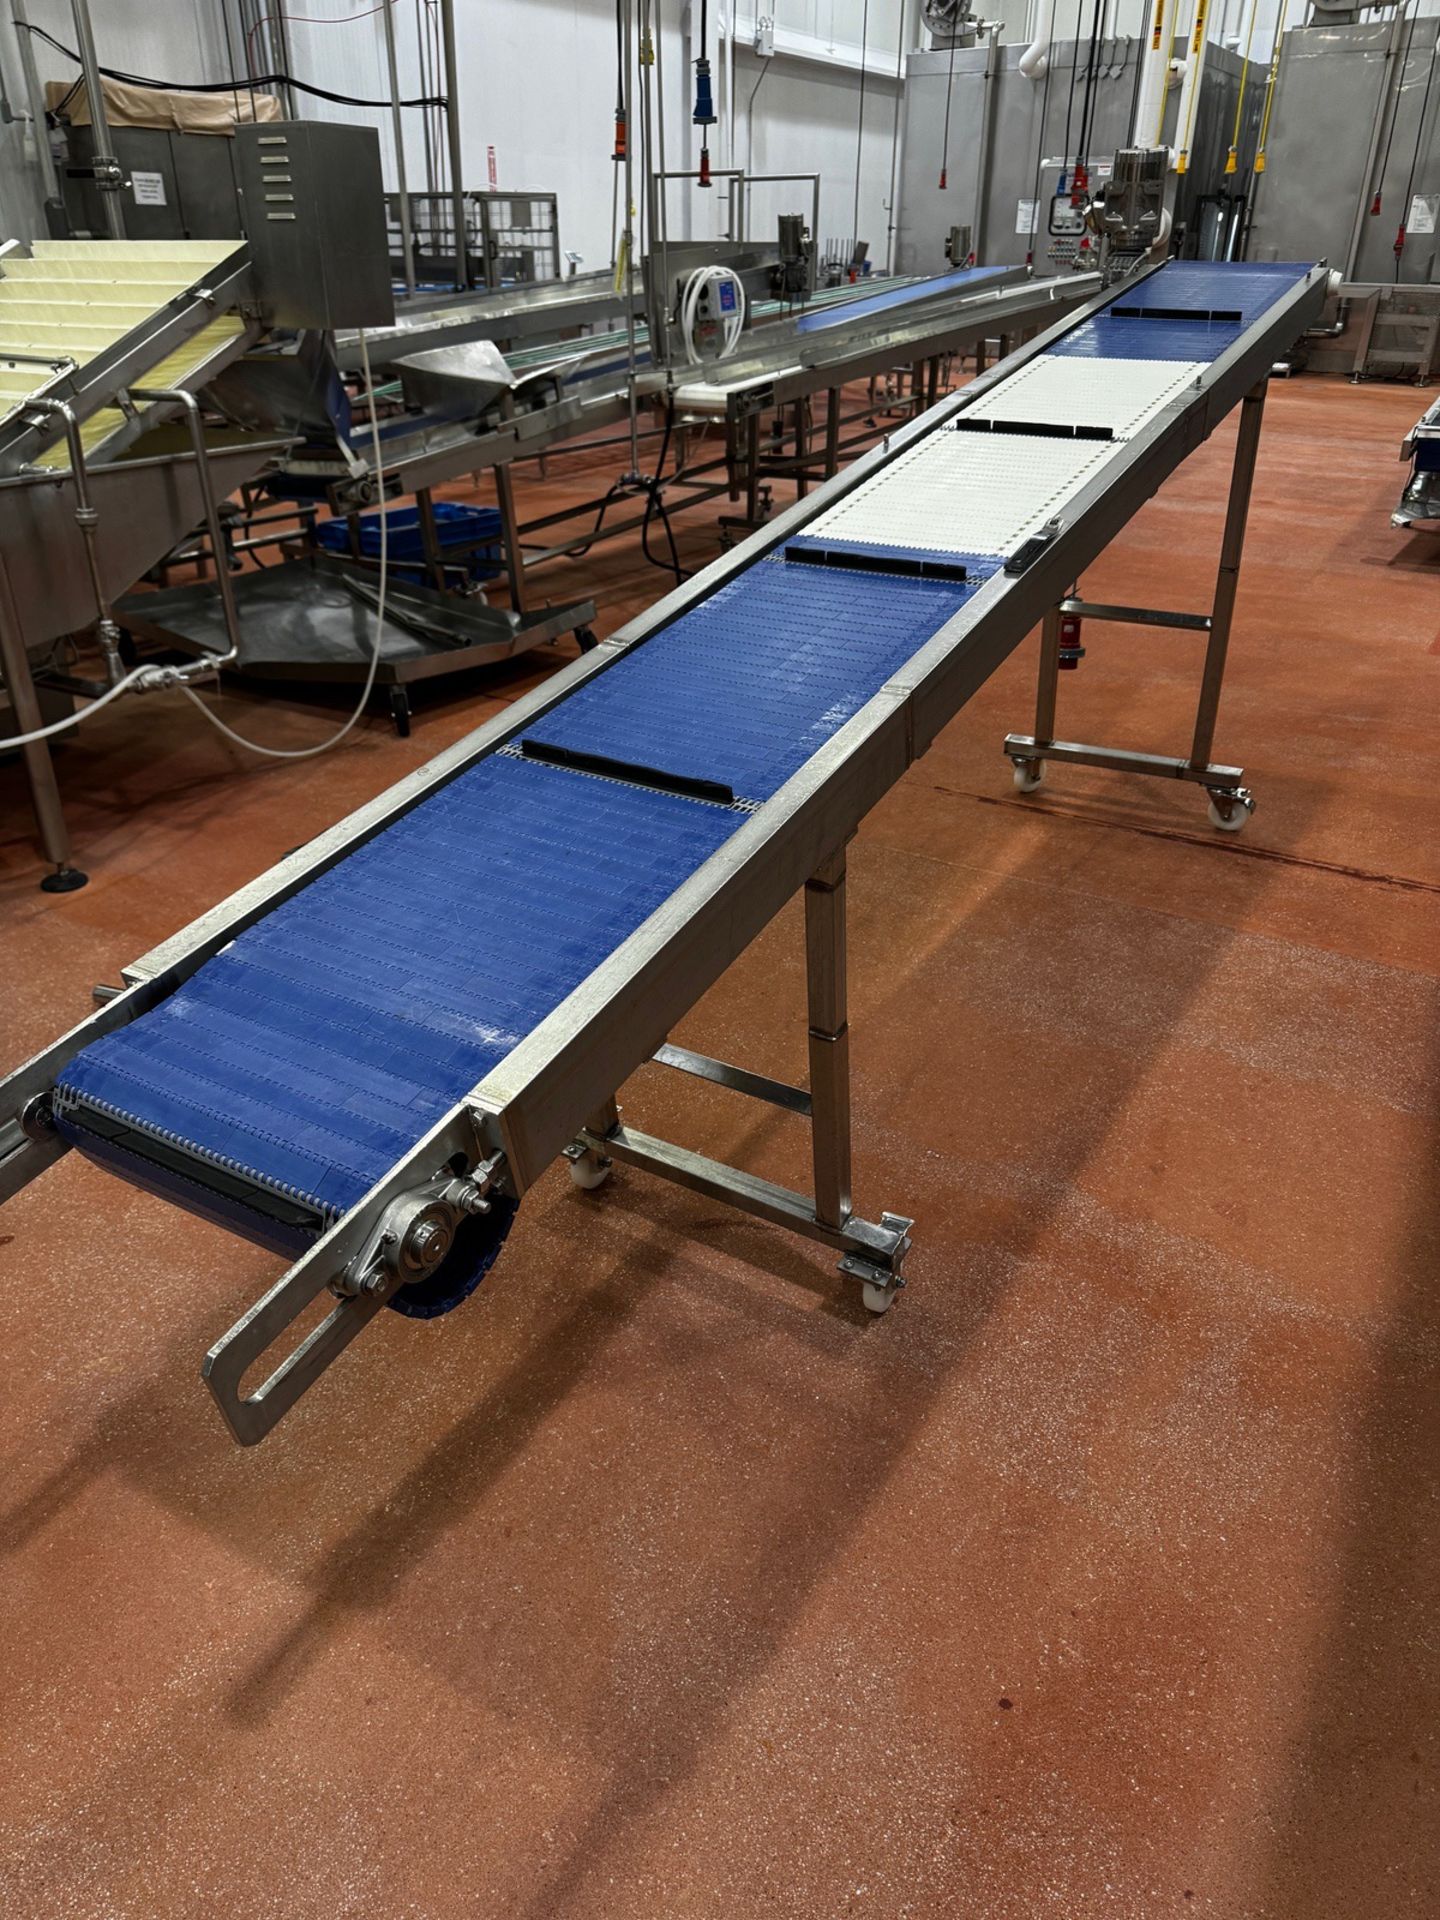 Stainless Steel Frame Incline Conveyor, 14" W x 11' OA Length, Mounted on Casters - Image 3 of 4